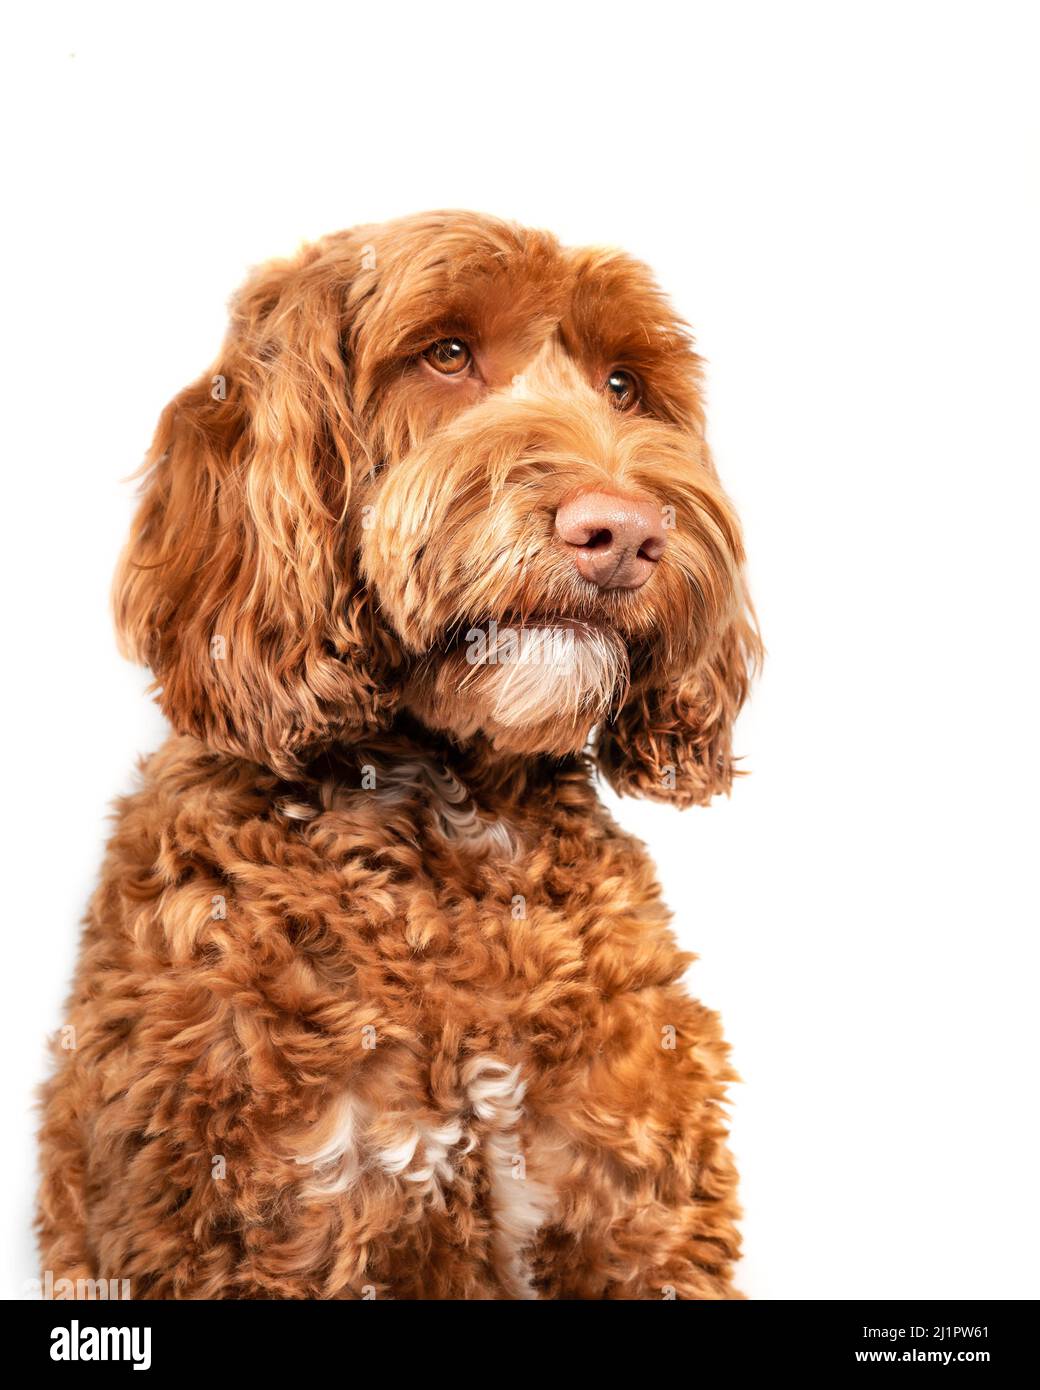 Isolated fluffy dog looking to the right. Three quarter view of medium to large dog. Serious, sad or longing dog expression. Brown or apricote female Stock Photo